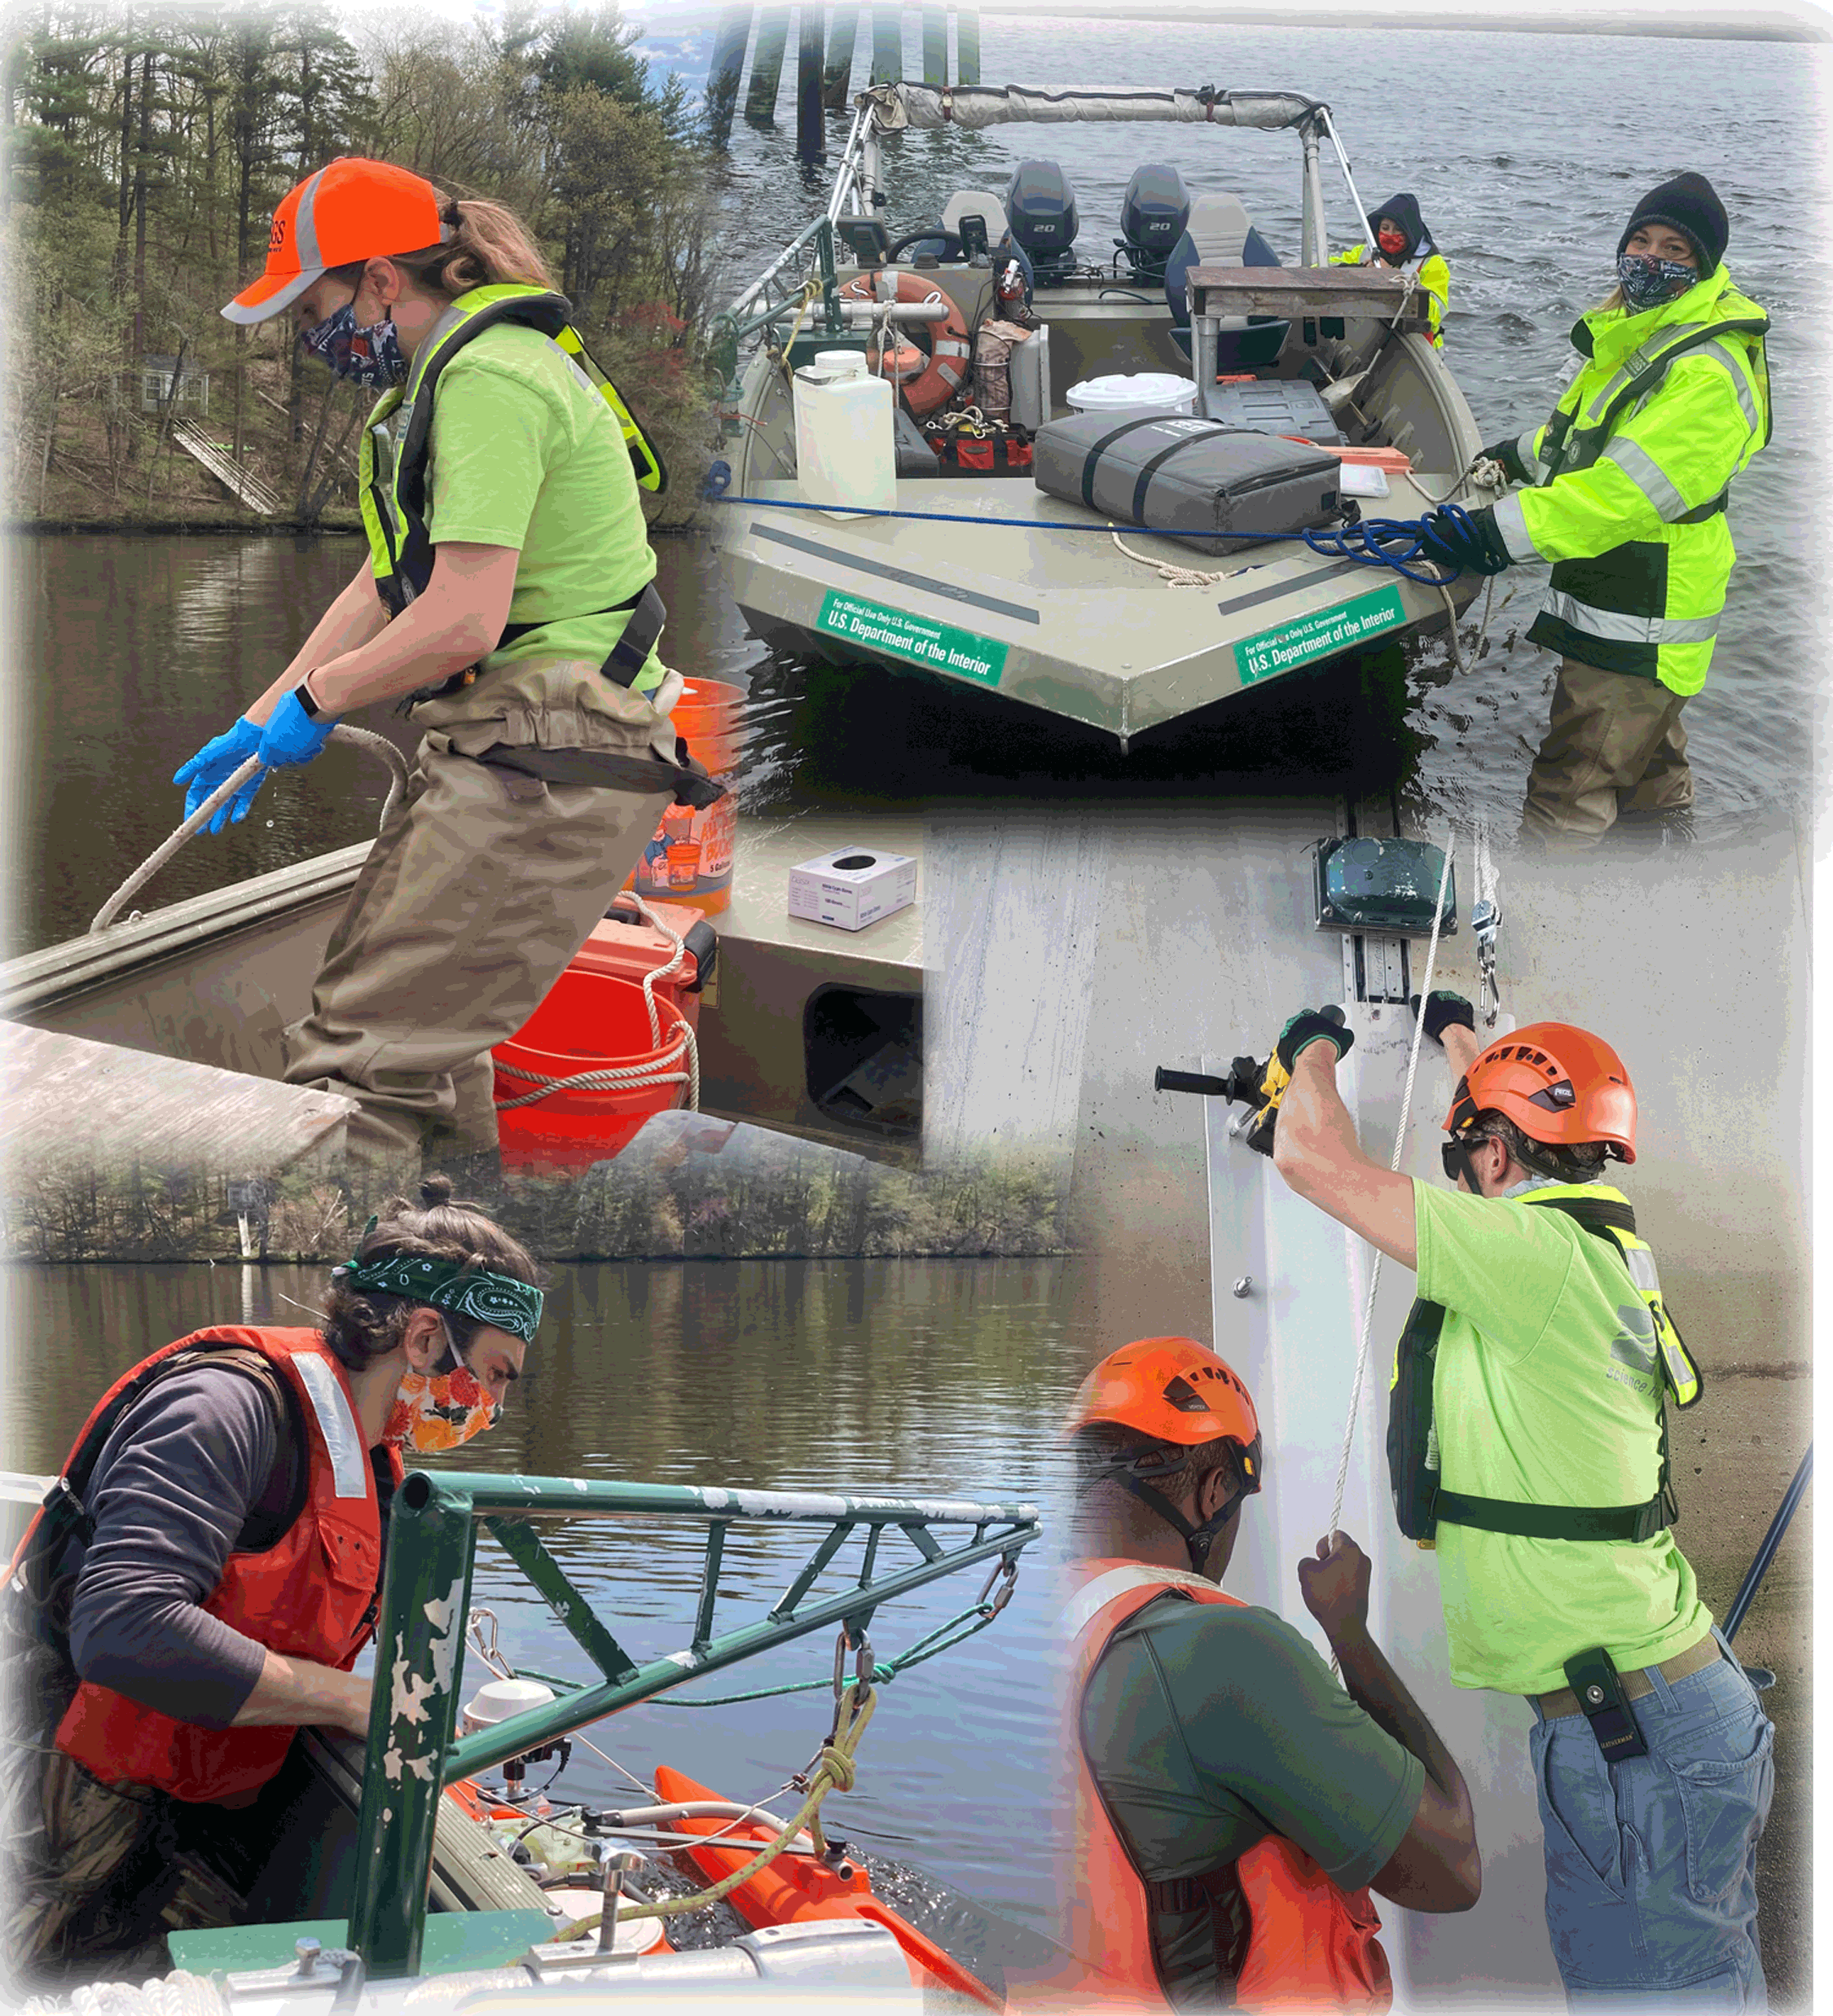 Photographic collage of employees wearing high-visibility clothing, life jackets,
                     and waterproof waders while working on boats and bridges.